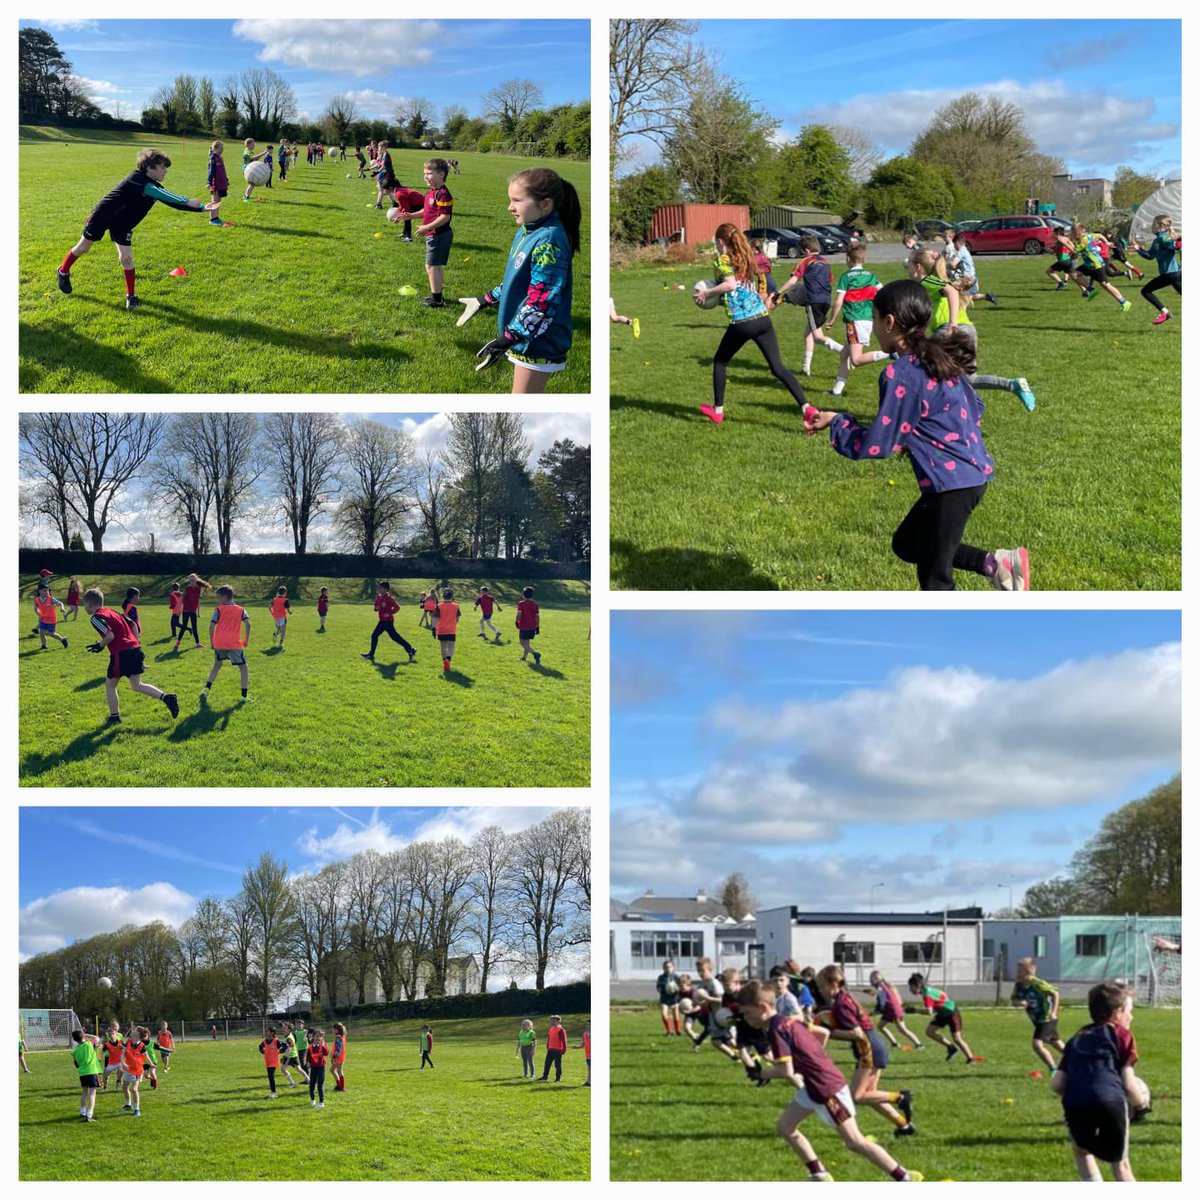 #mayogaa @MayoGAACoaching primary school program, the children from @stjosephsbrobe going thru their skills work & movement with @MayoGAA development officer @DBFahy well done all👏👏👏